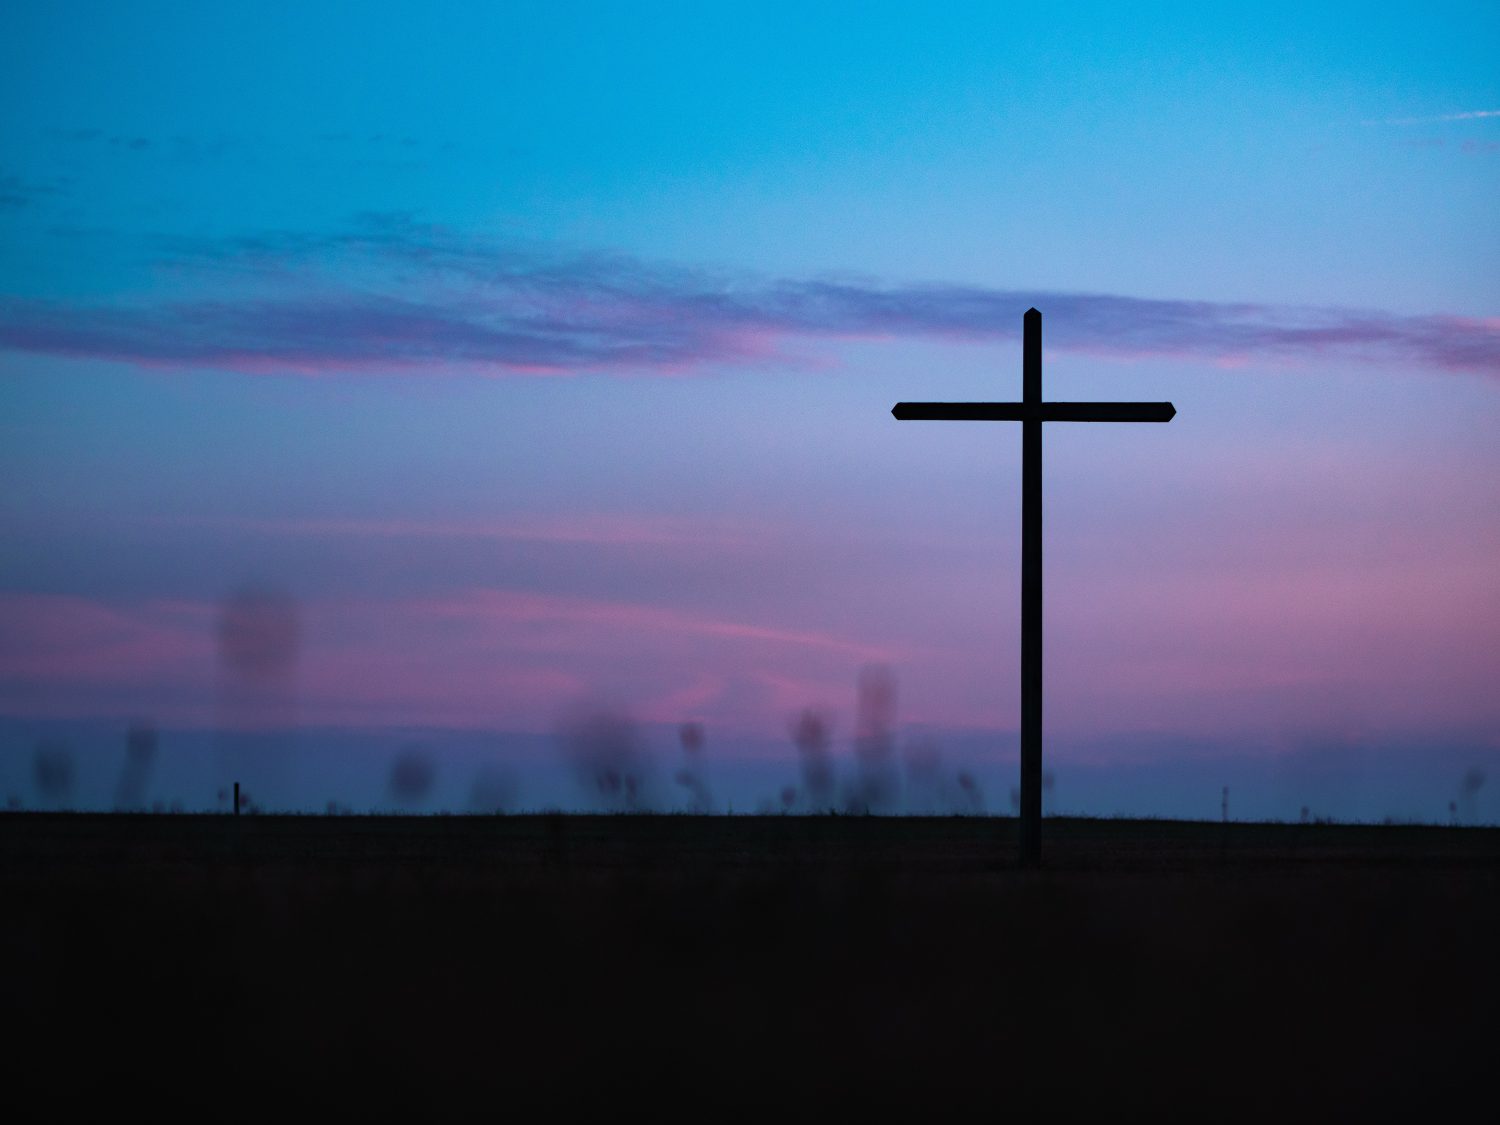 ash wednesday: blue and purple sky with a cross silhouette